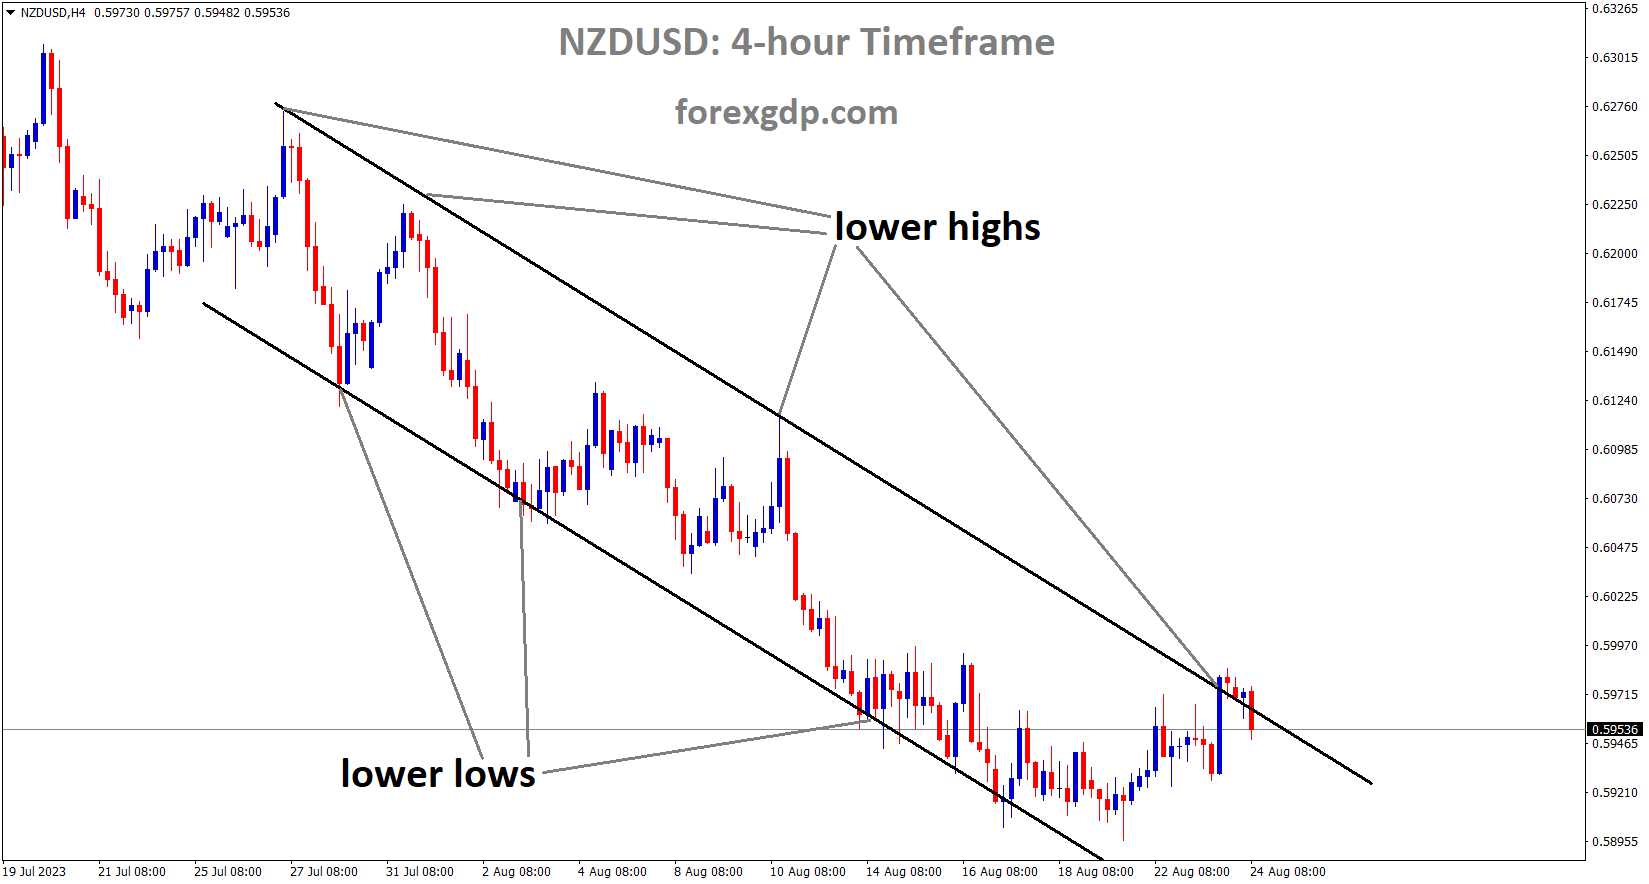 NZDUSD is moving in the Descending channel and the market has fallen from the lower high area of the channel